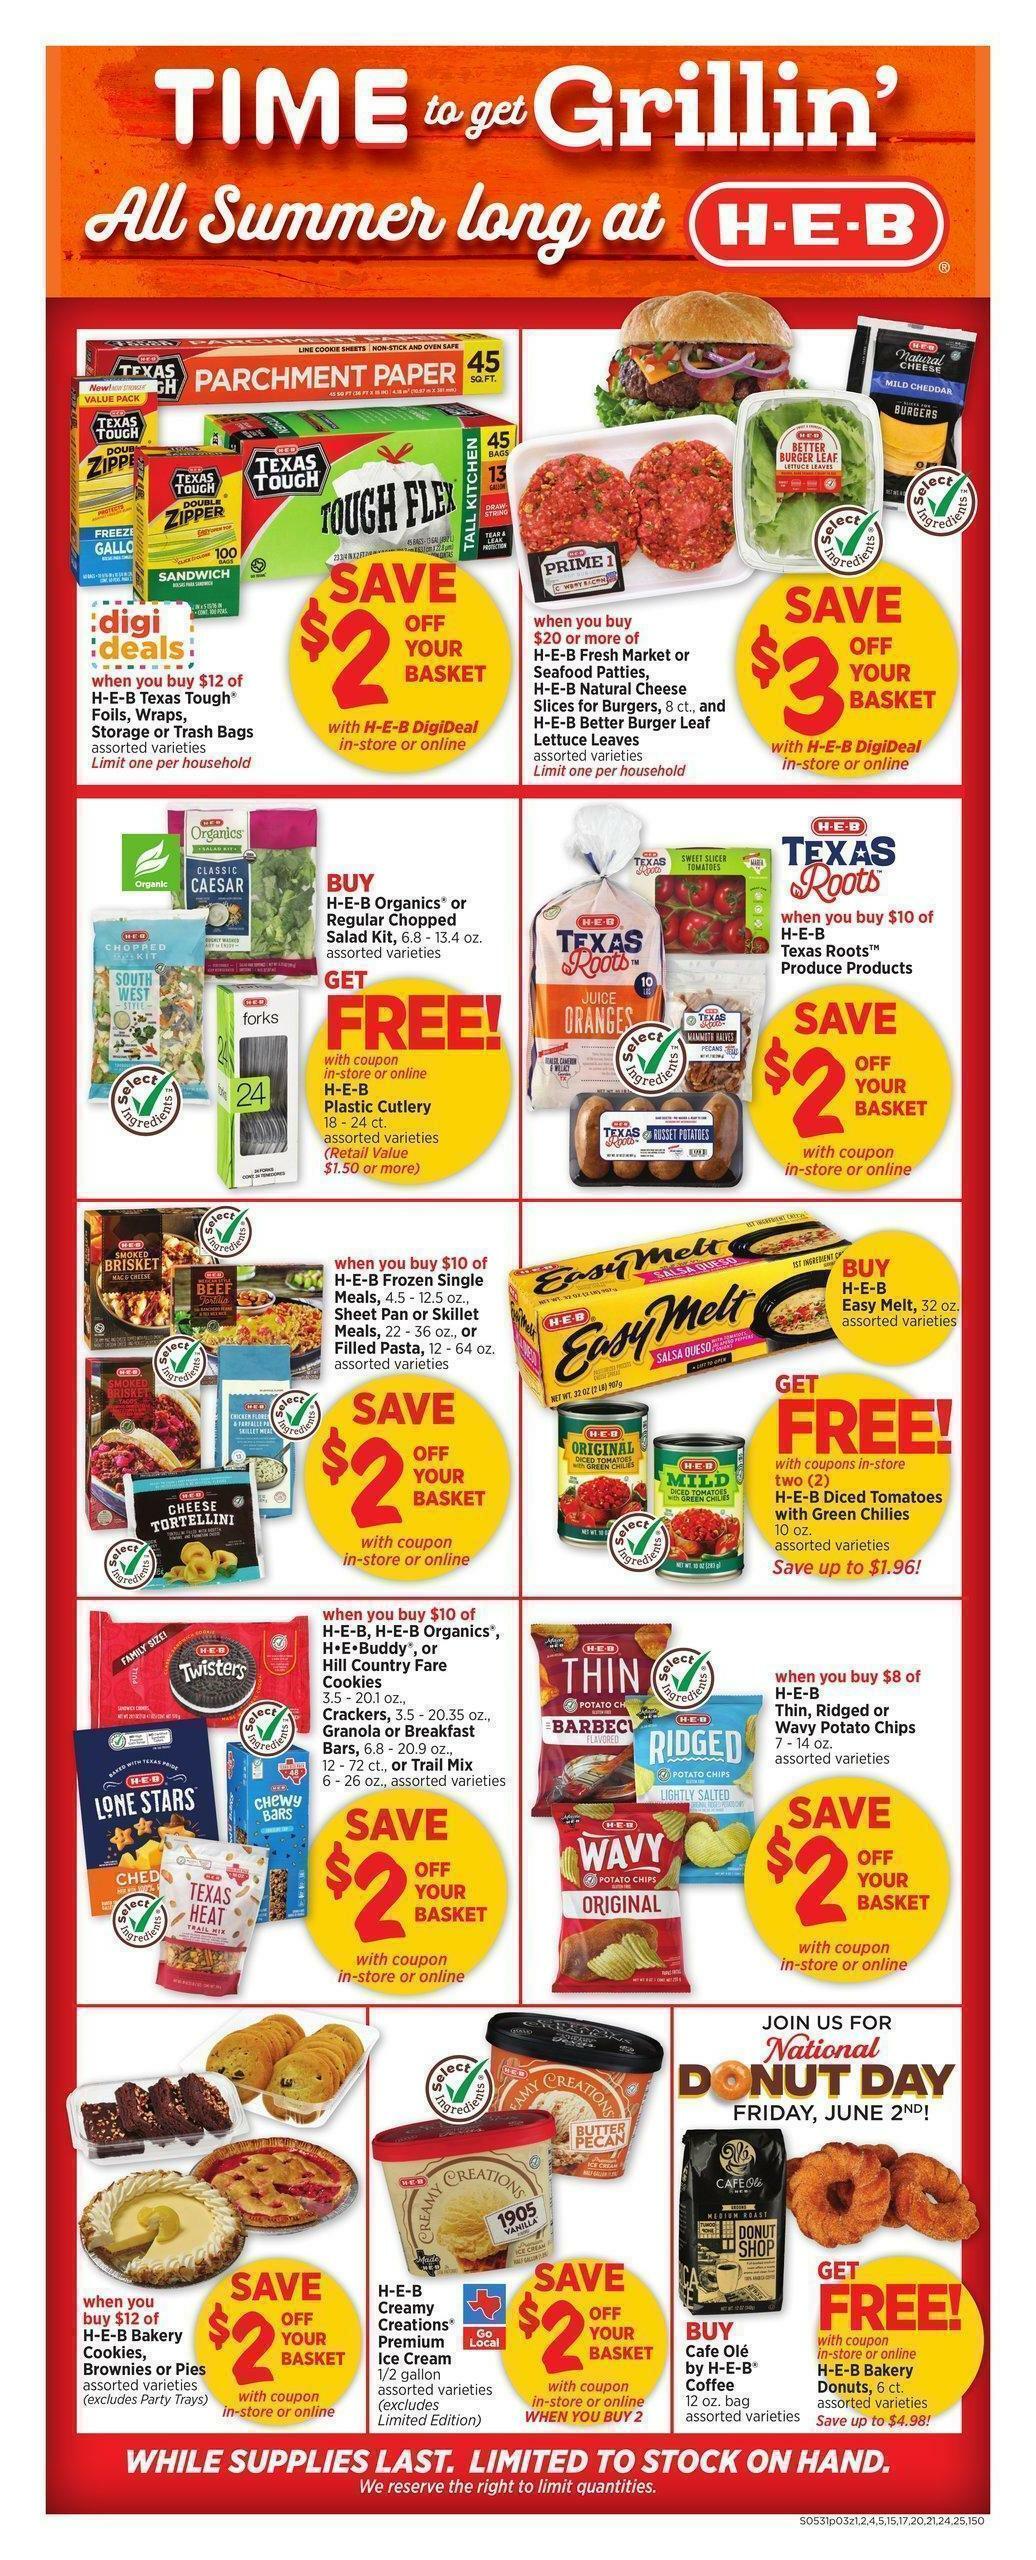 H-E-B Weekly Ad from May 31